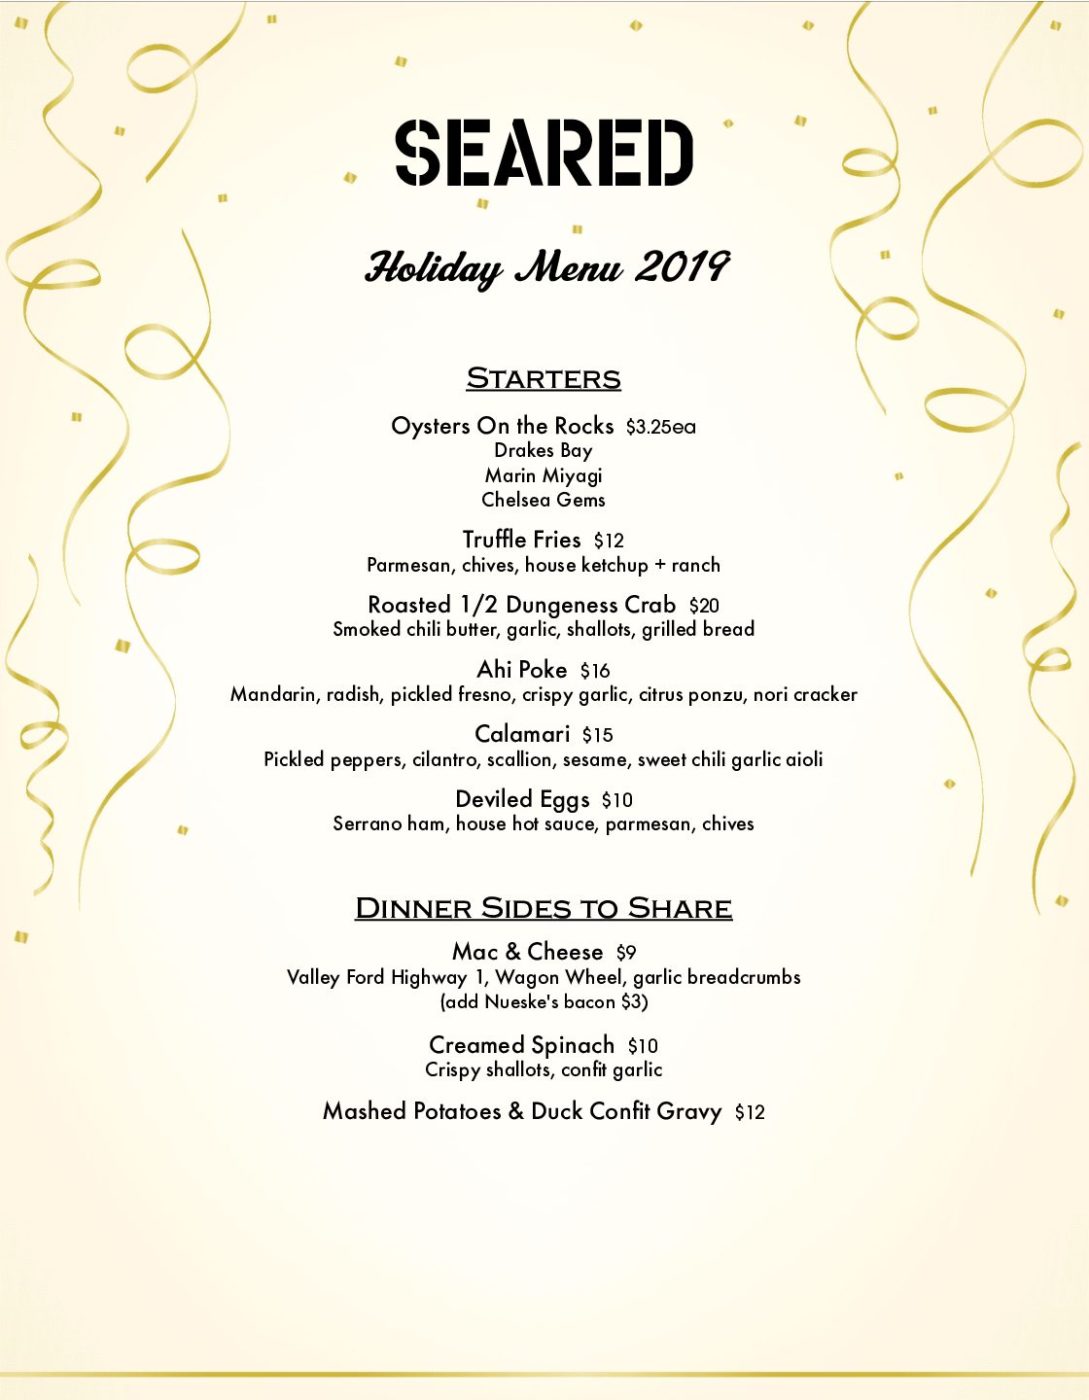 Limited Special Holiday 2019 menu available at Seared in Petaluma